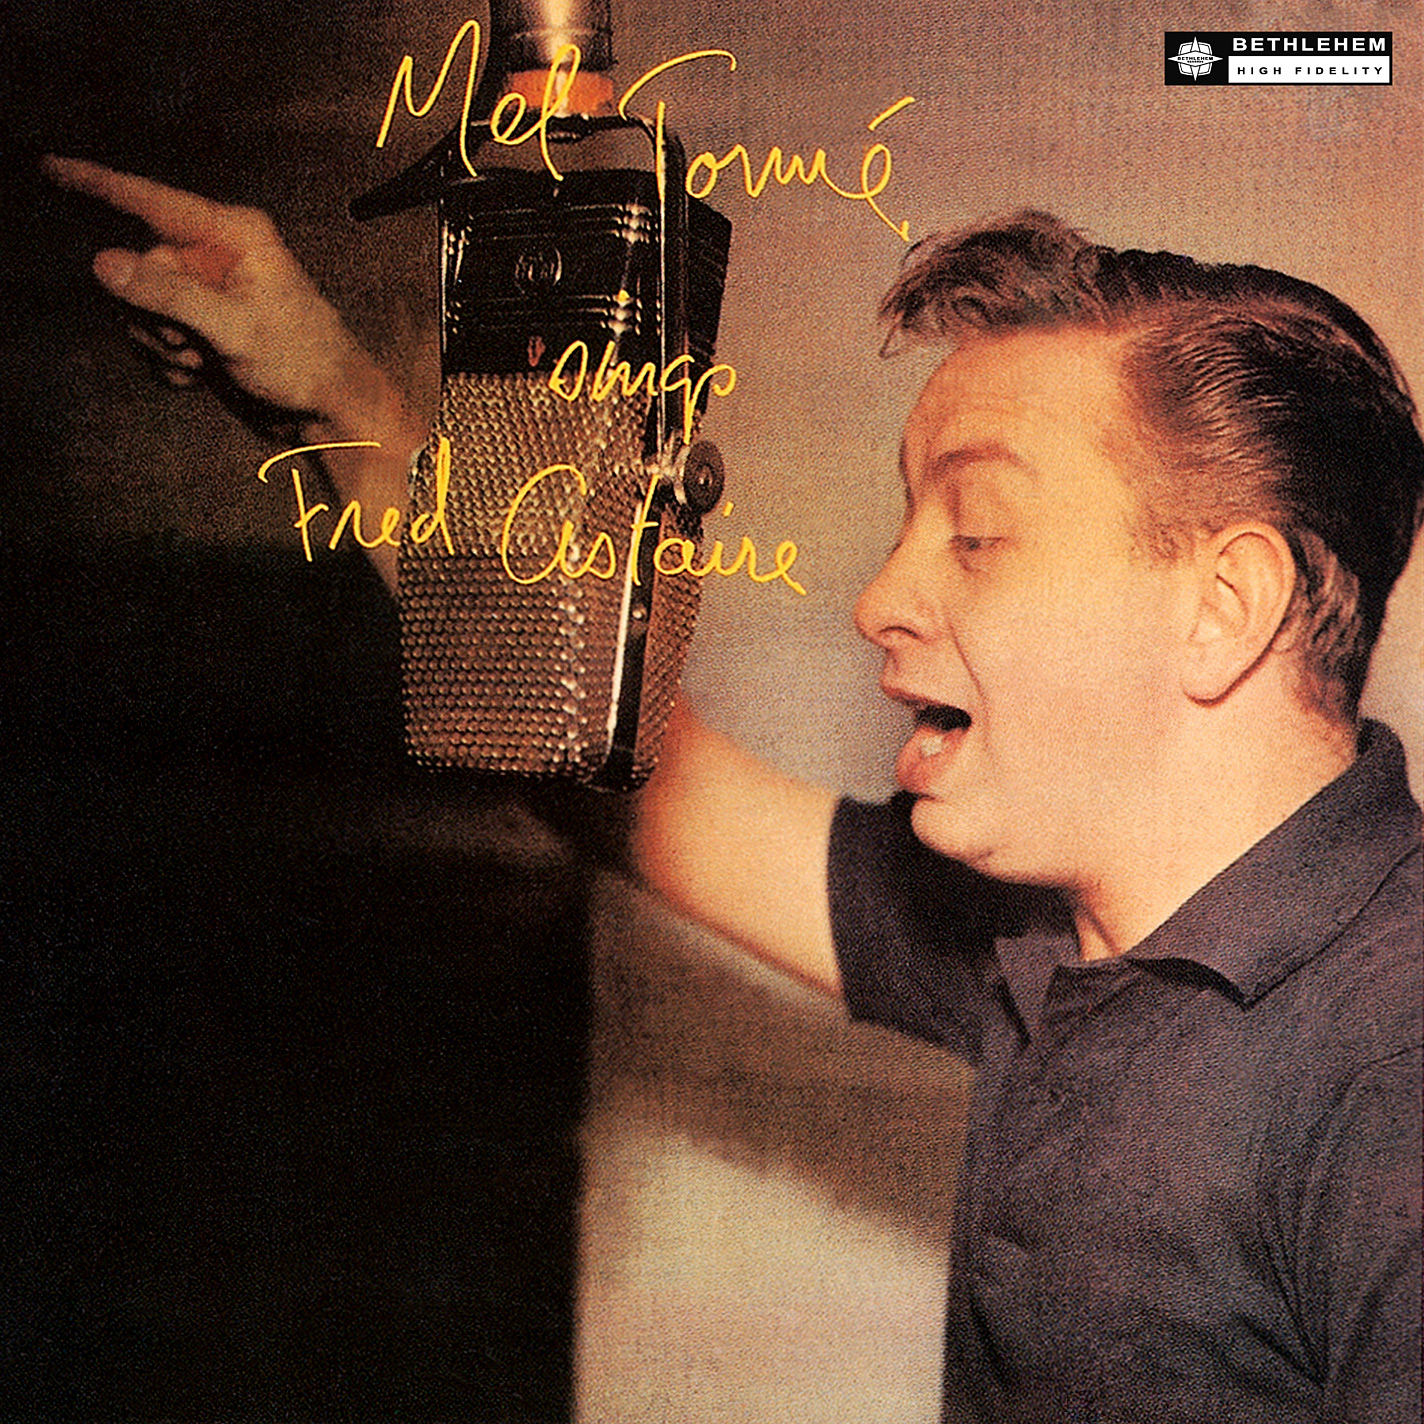 Mel Torme - Mel Torme Sings Fred Astaire (1957/2014) [PrestoClassical FLAC 24bit/96kHz]